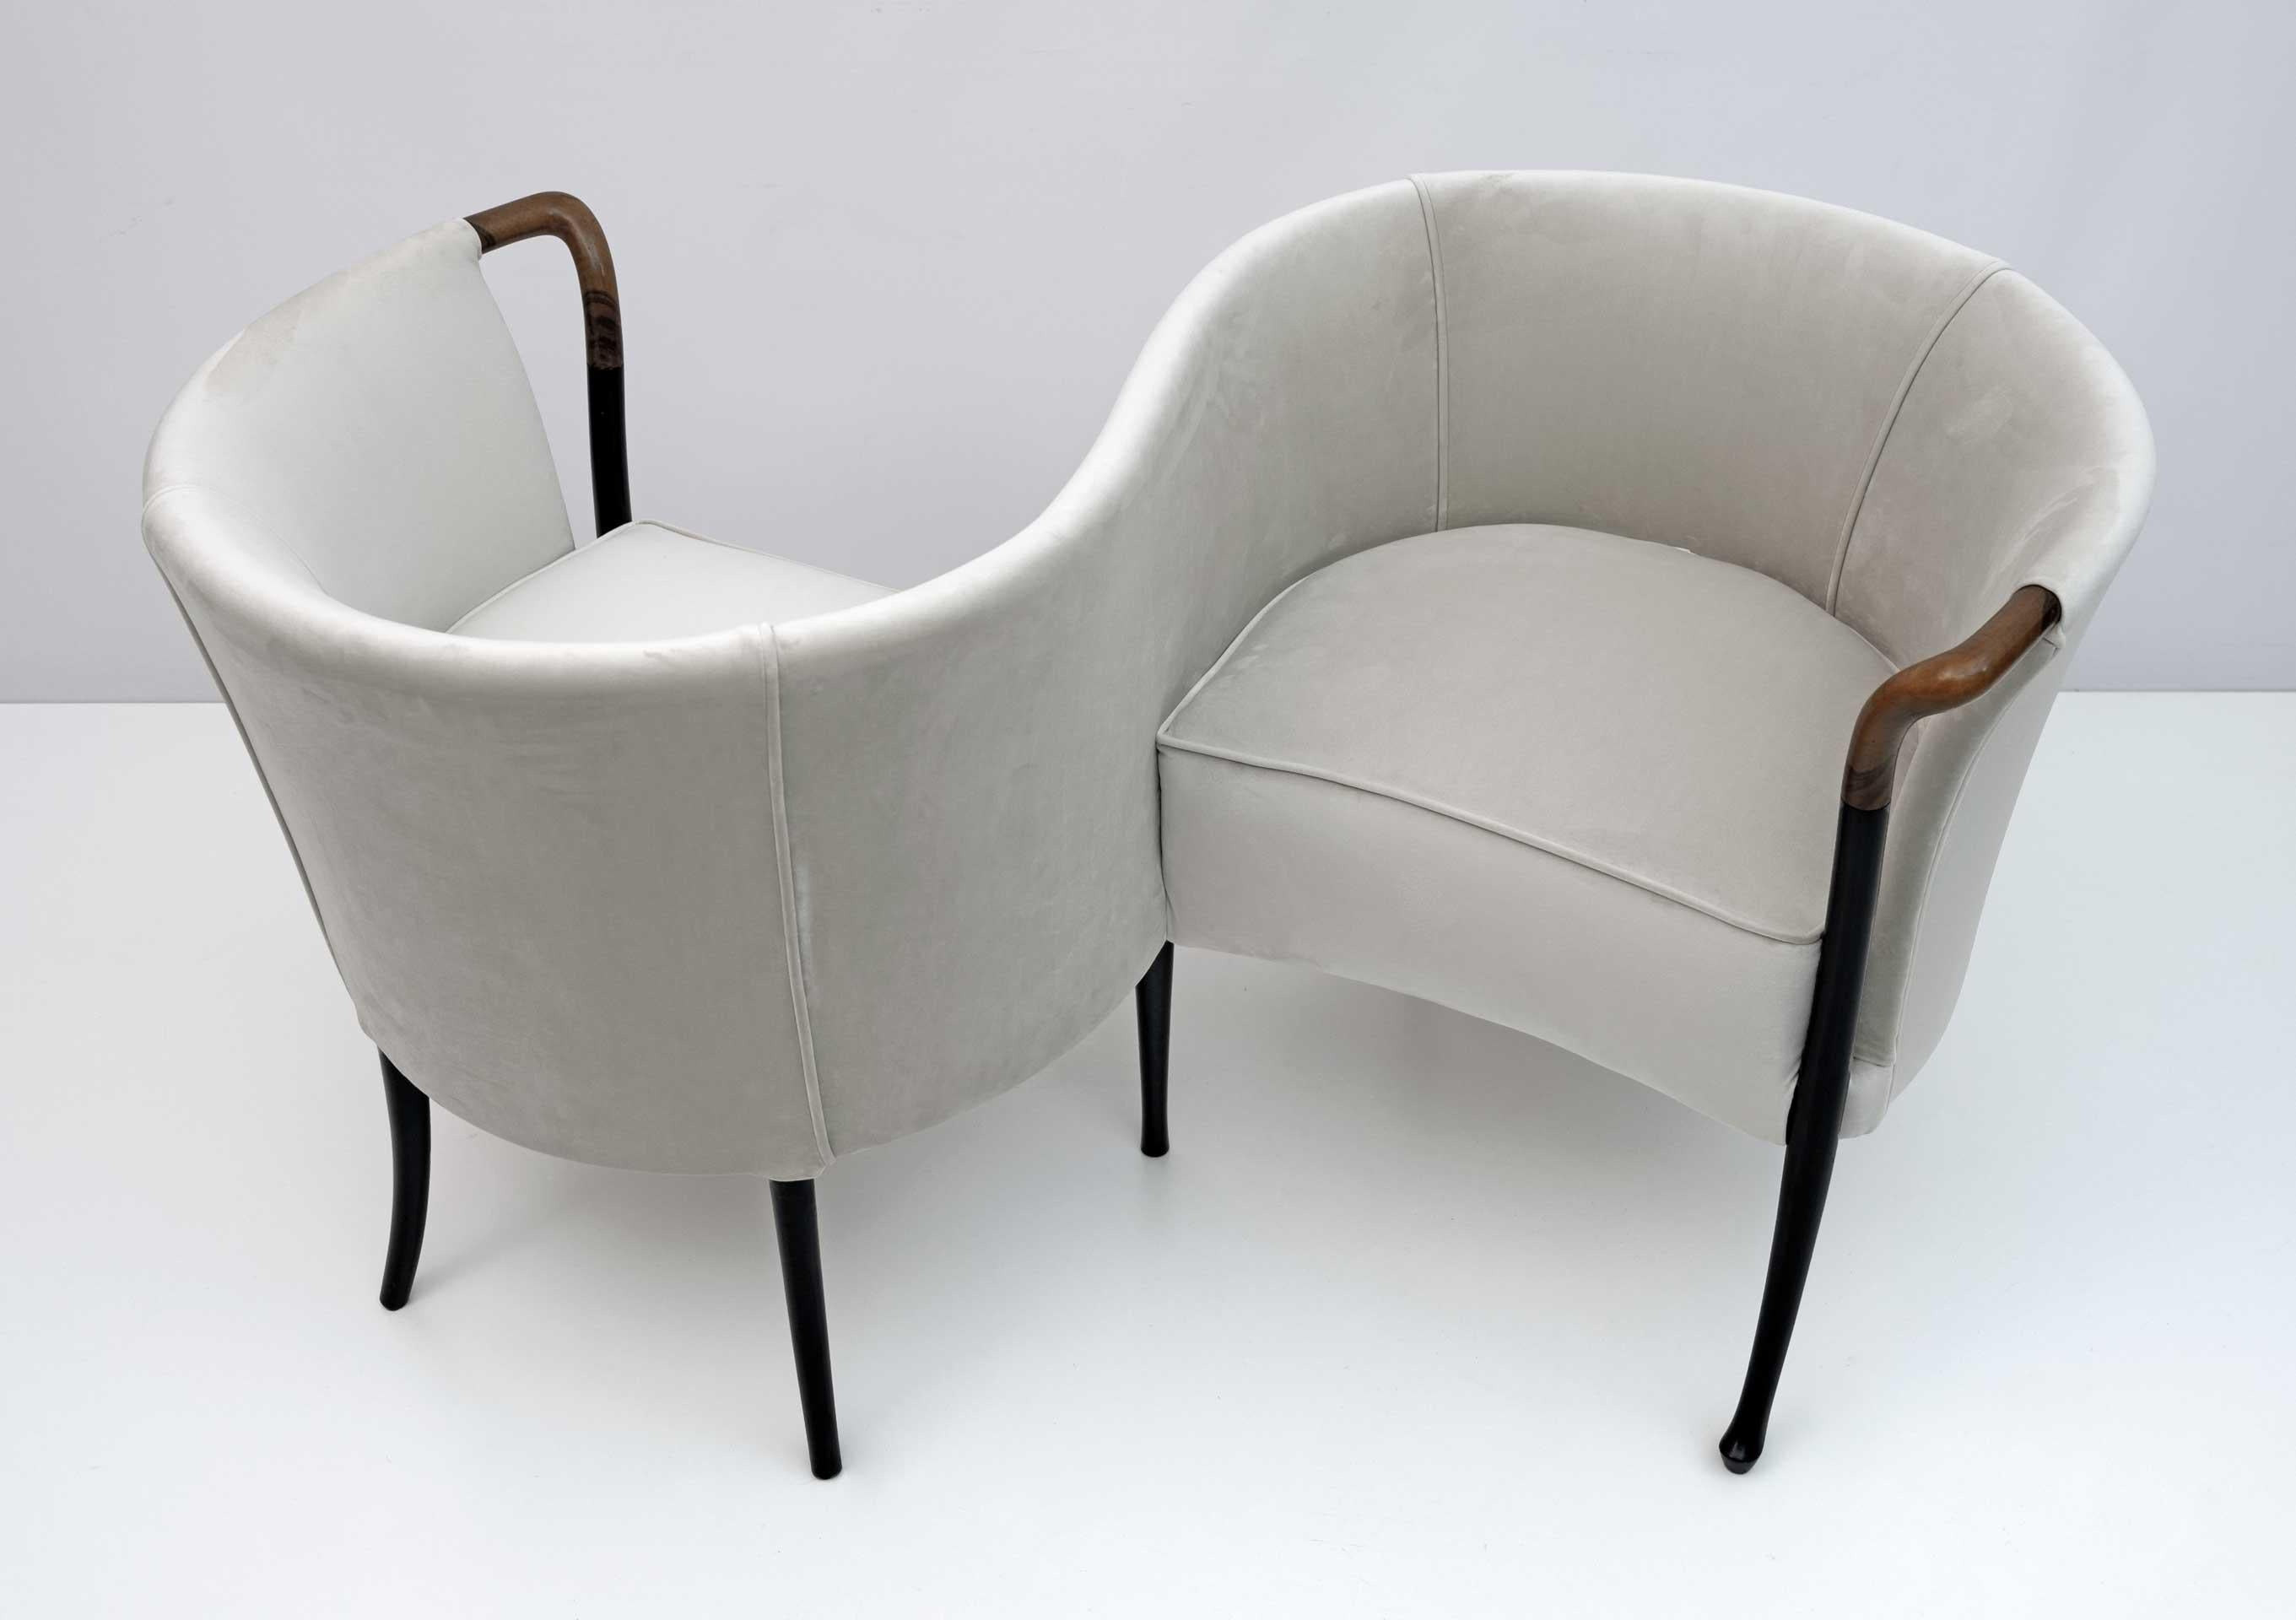 Rare conversation sofa in solid ebonized beech and armrests in glossy Pau Ferro, the padding of the seat and back is in polyurethane foam.
Fully restored and upholstered in ivory velvet.

Founded by Luigi Giorgetti in Brianza in 1898, the Italian